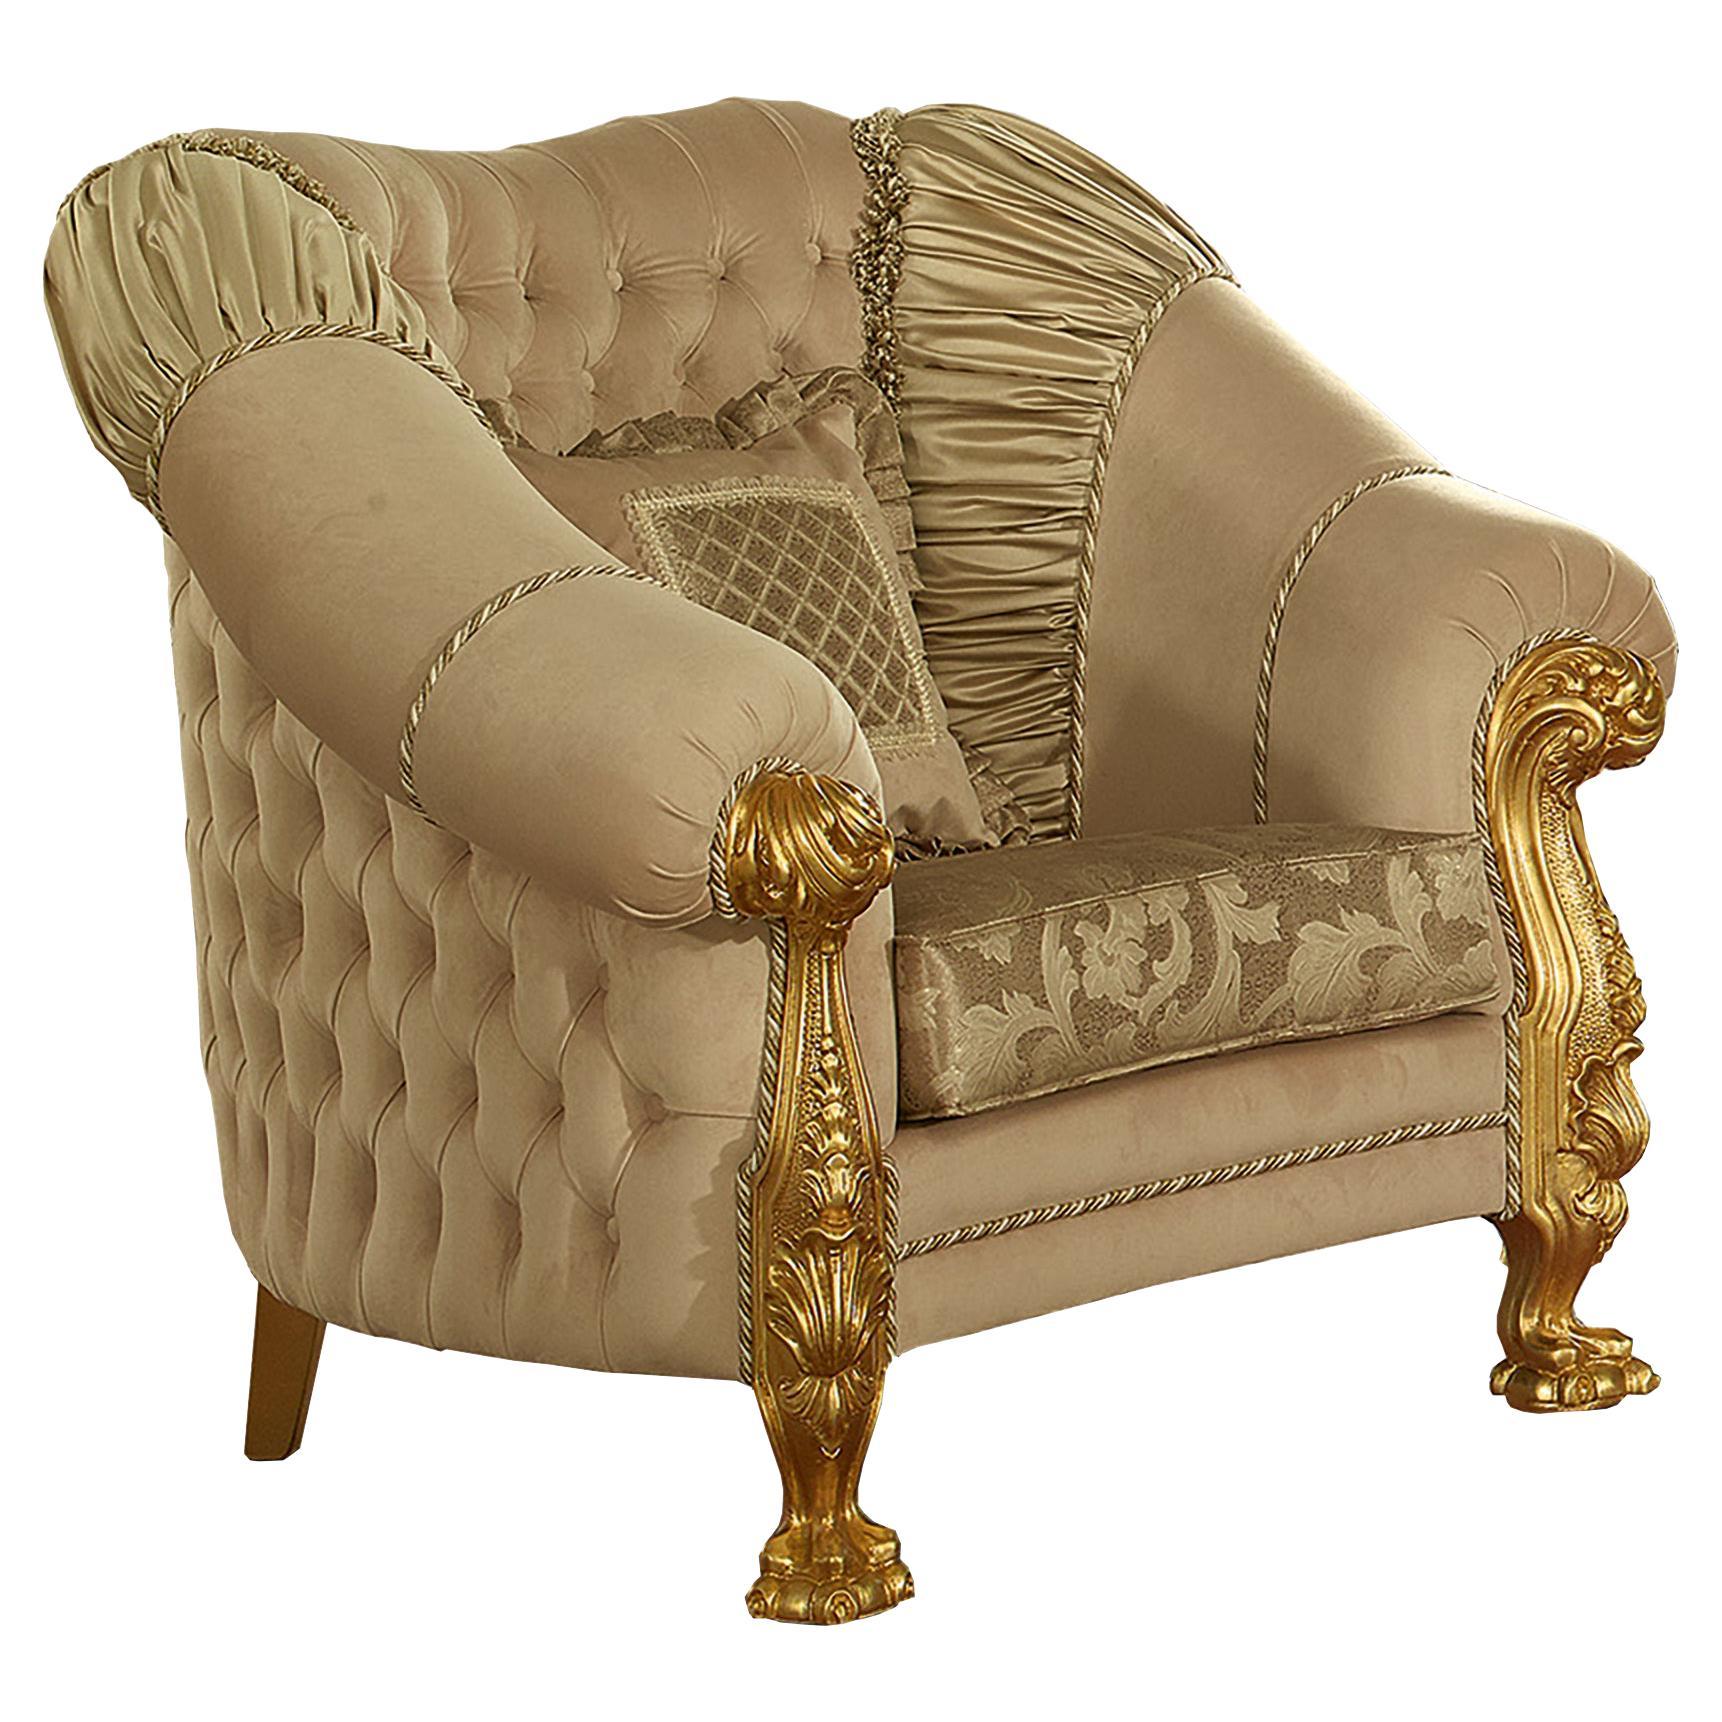 Bespoke Gilded Armchair in Ivory Capitonne and Lion Carvings For Sale